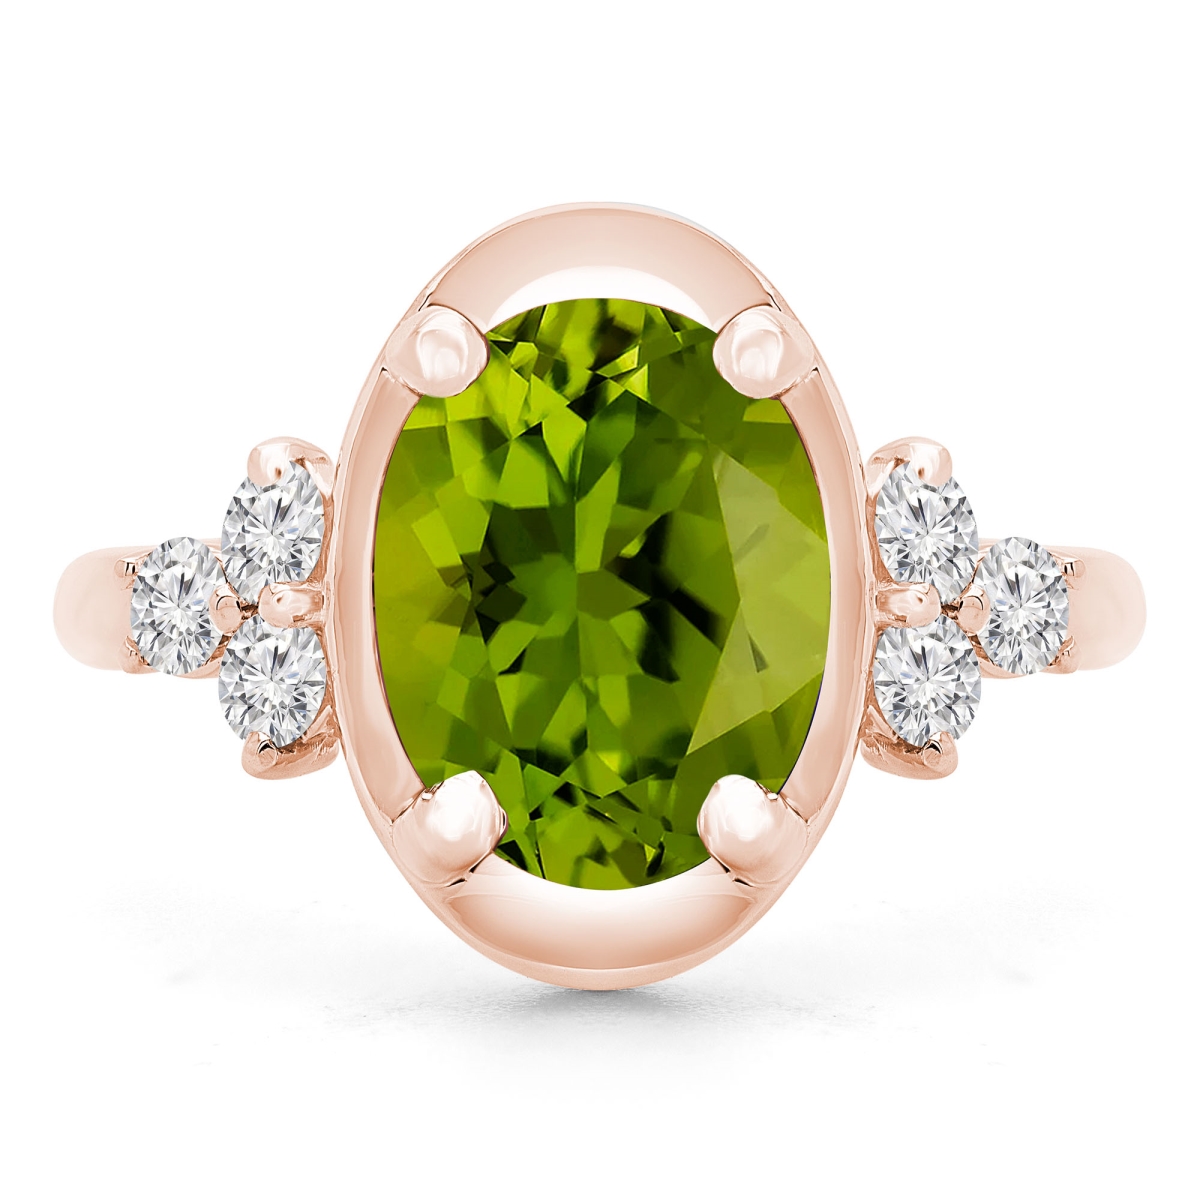 Picture of Majesty Diamonds MD190412-6.75 3.9 CTW Oval Green Peridot Cocktail Ring in 14K Rose Gold - Size 6.75